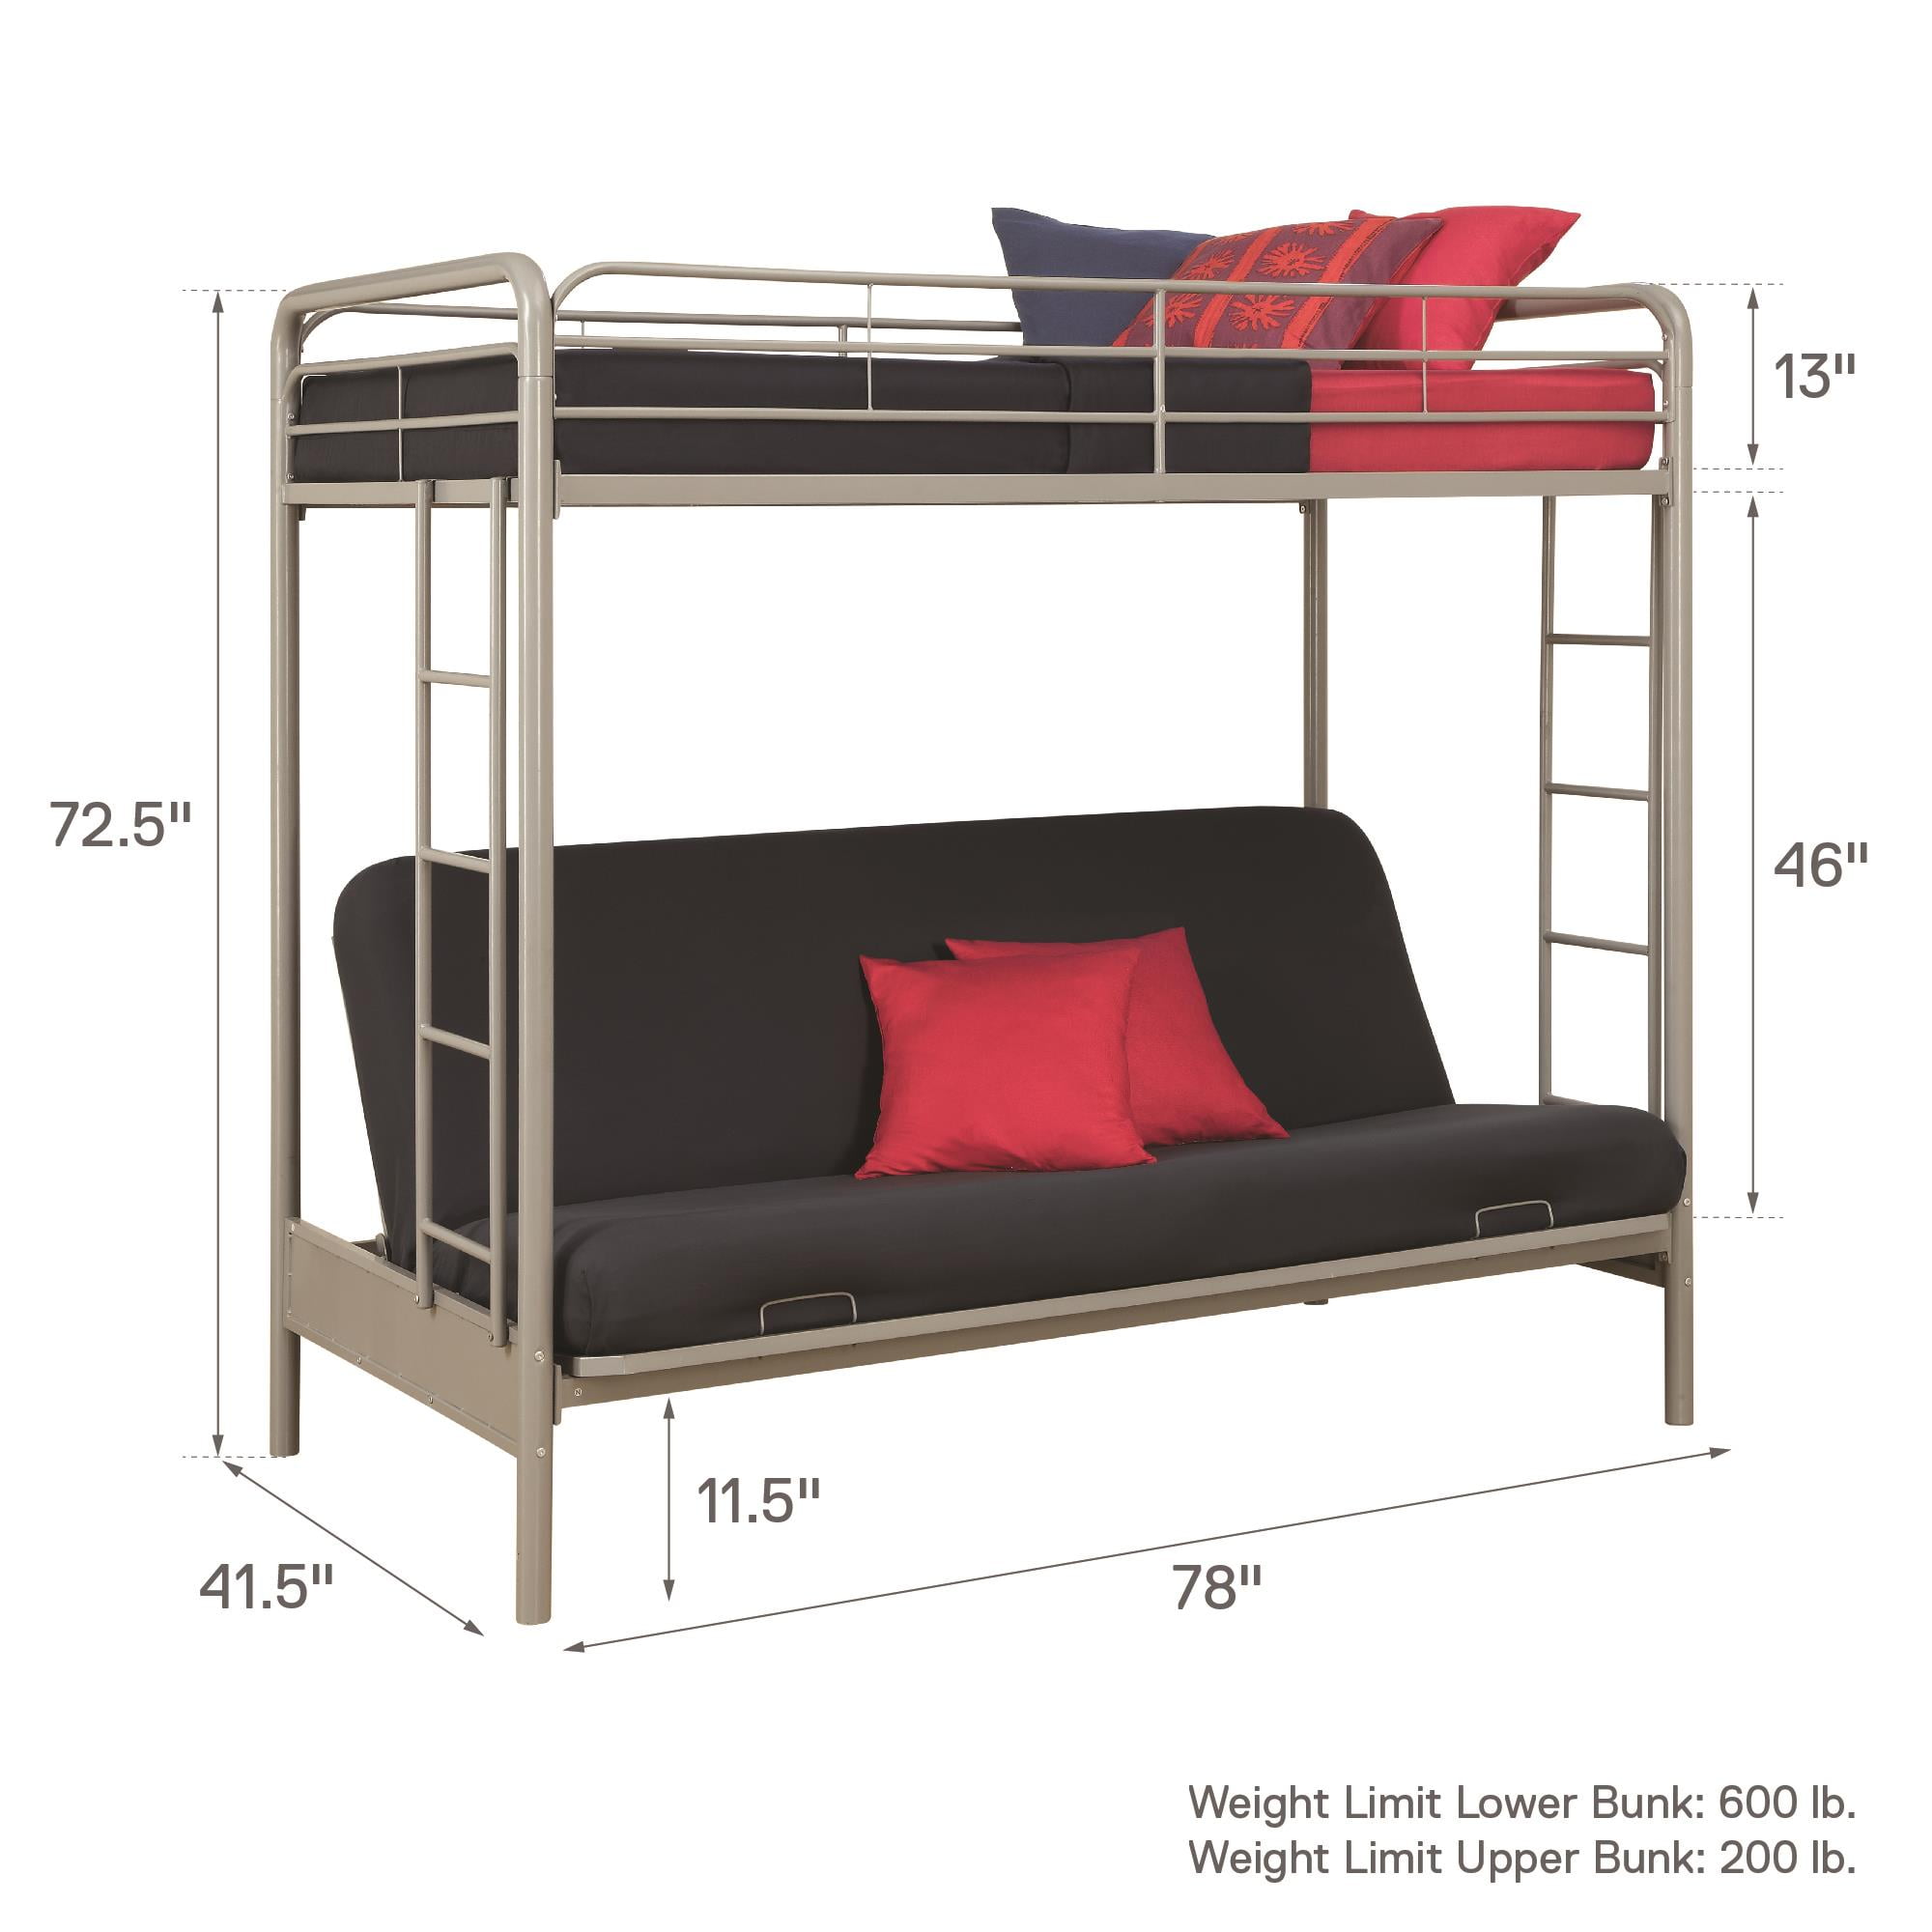 double loft bed with futon